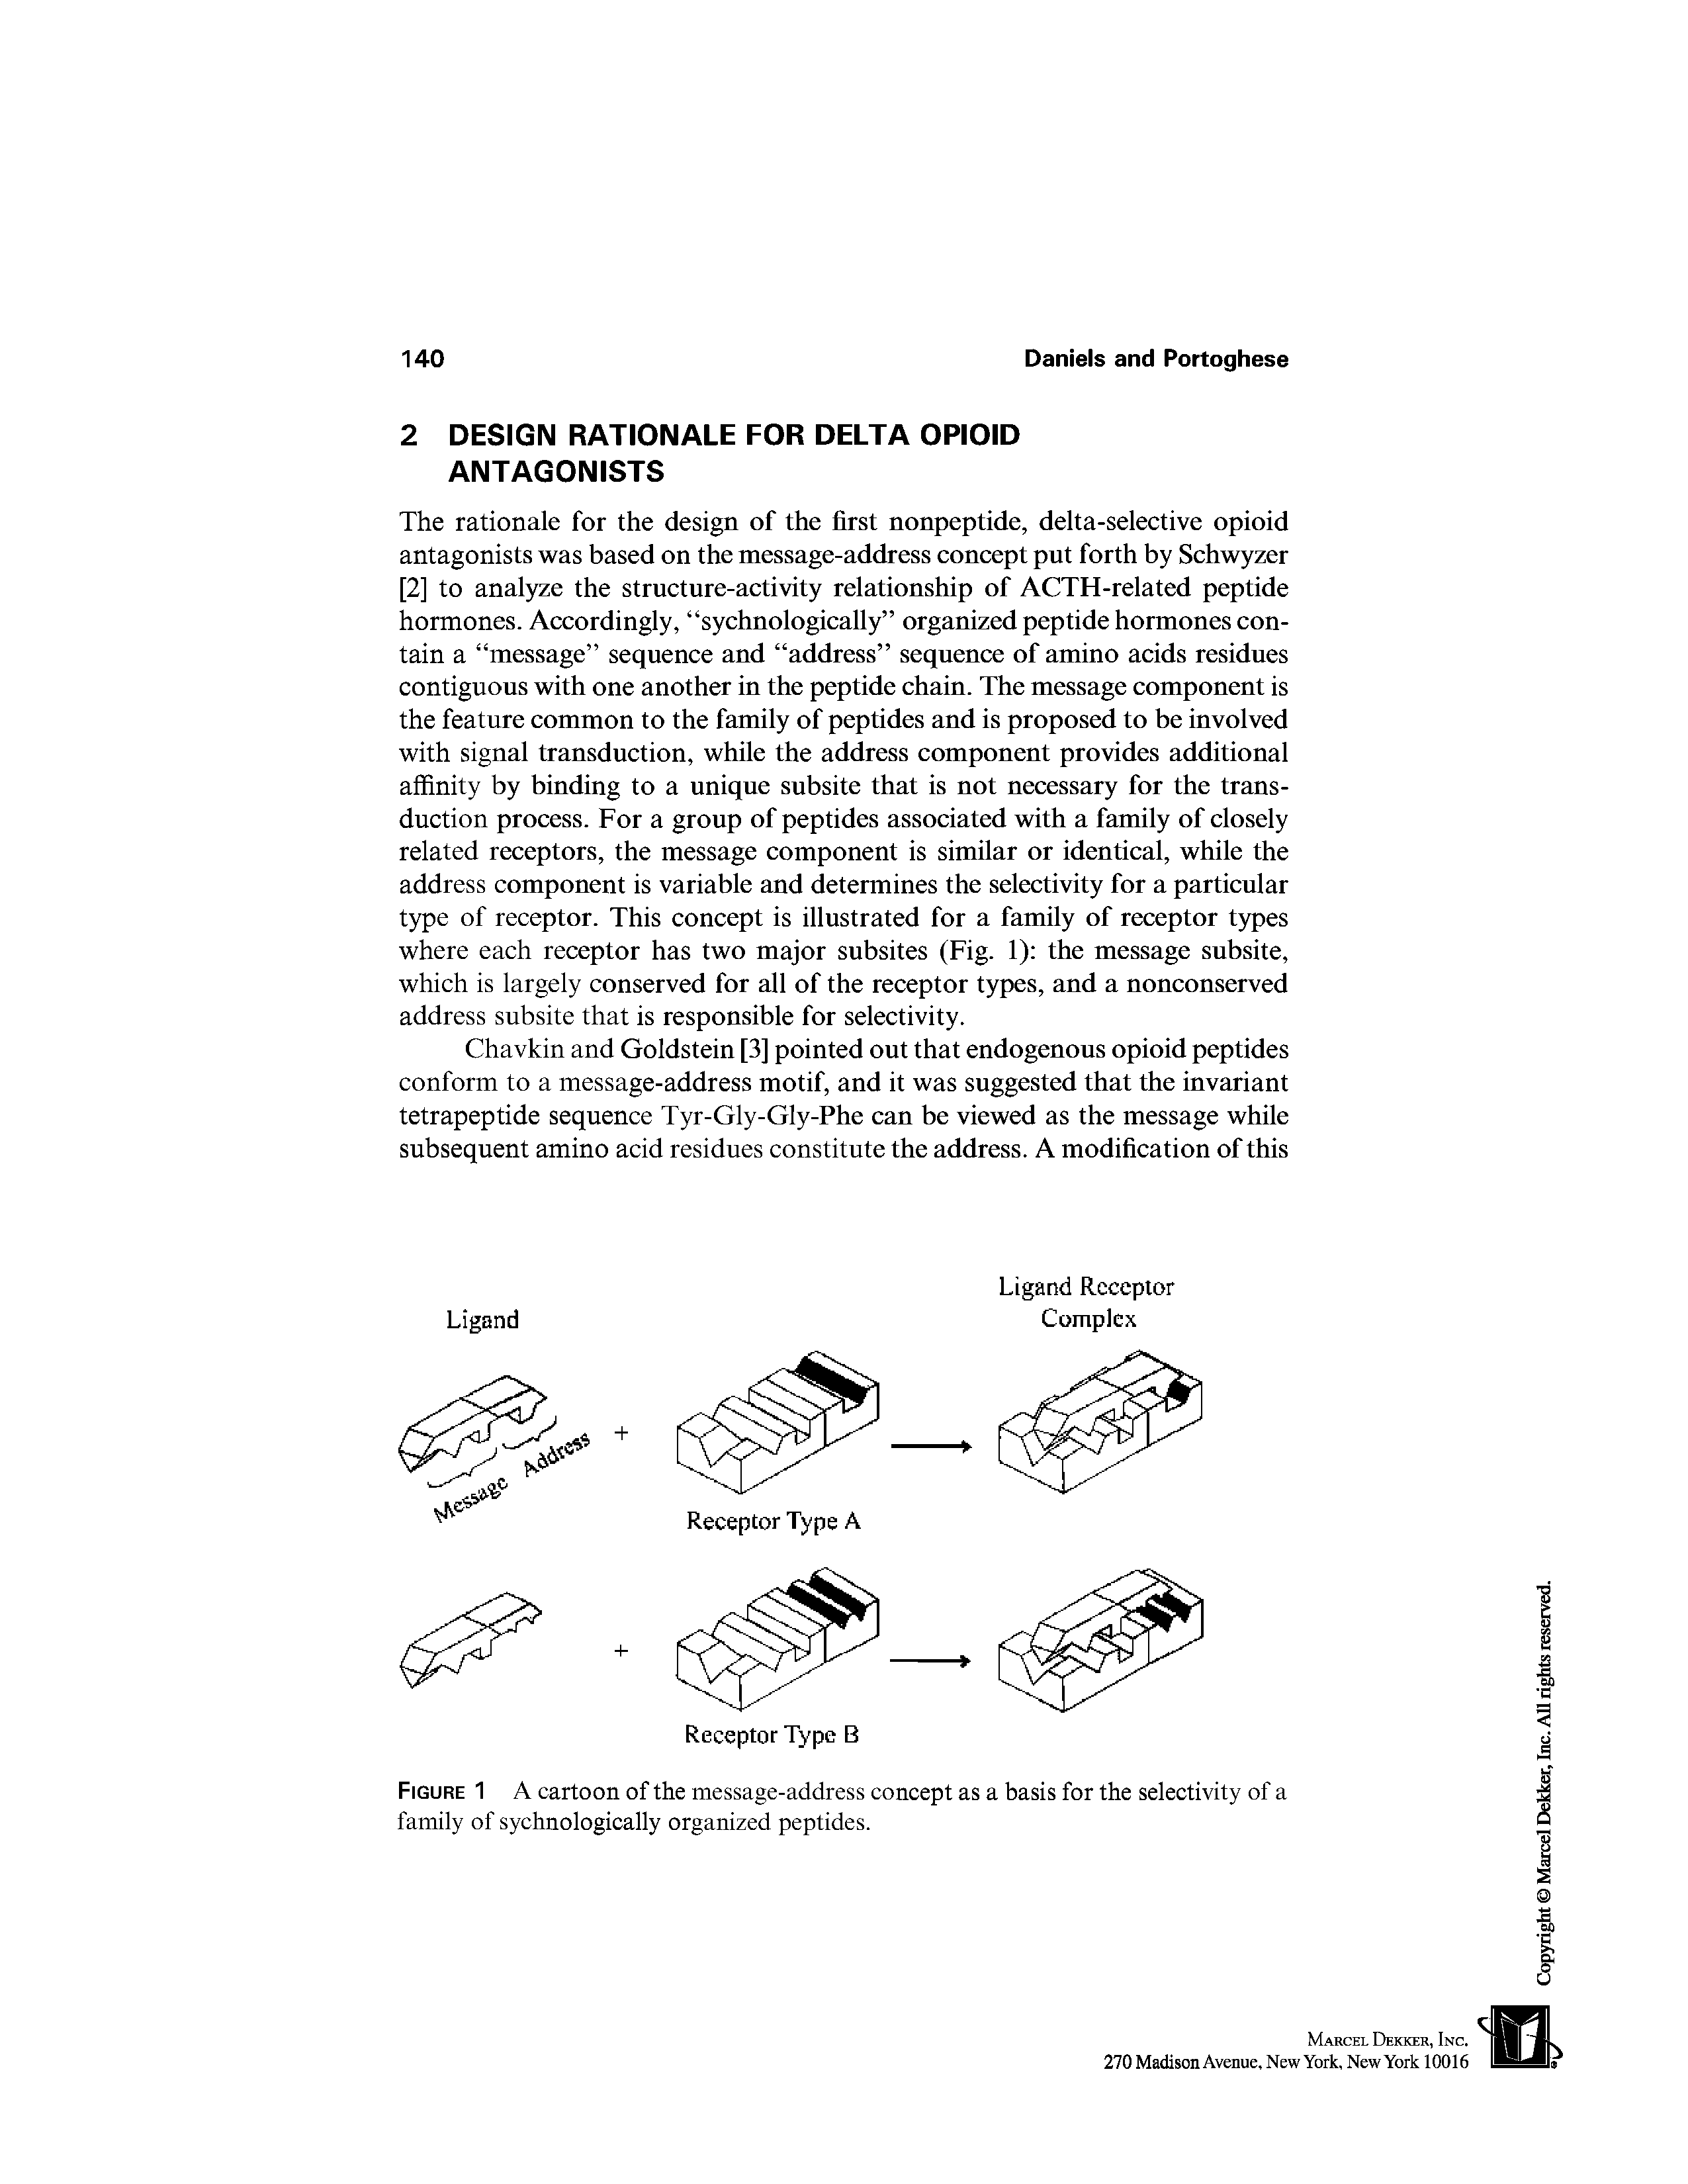 Figure 1 A cartoon of the message-address concept as a basis for the selectivity of a family of sychnologically organized peptides.